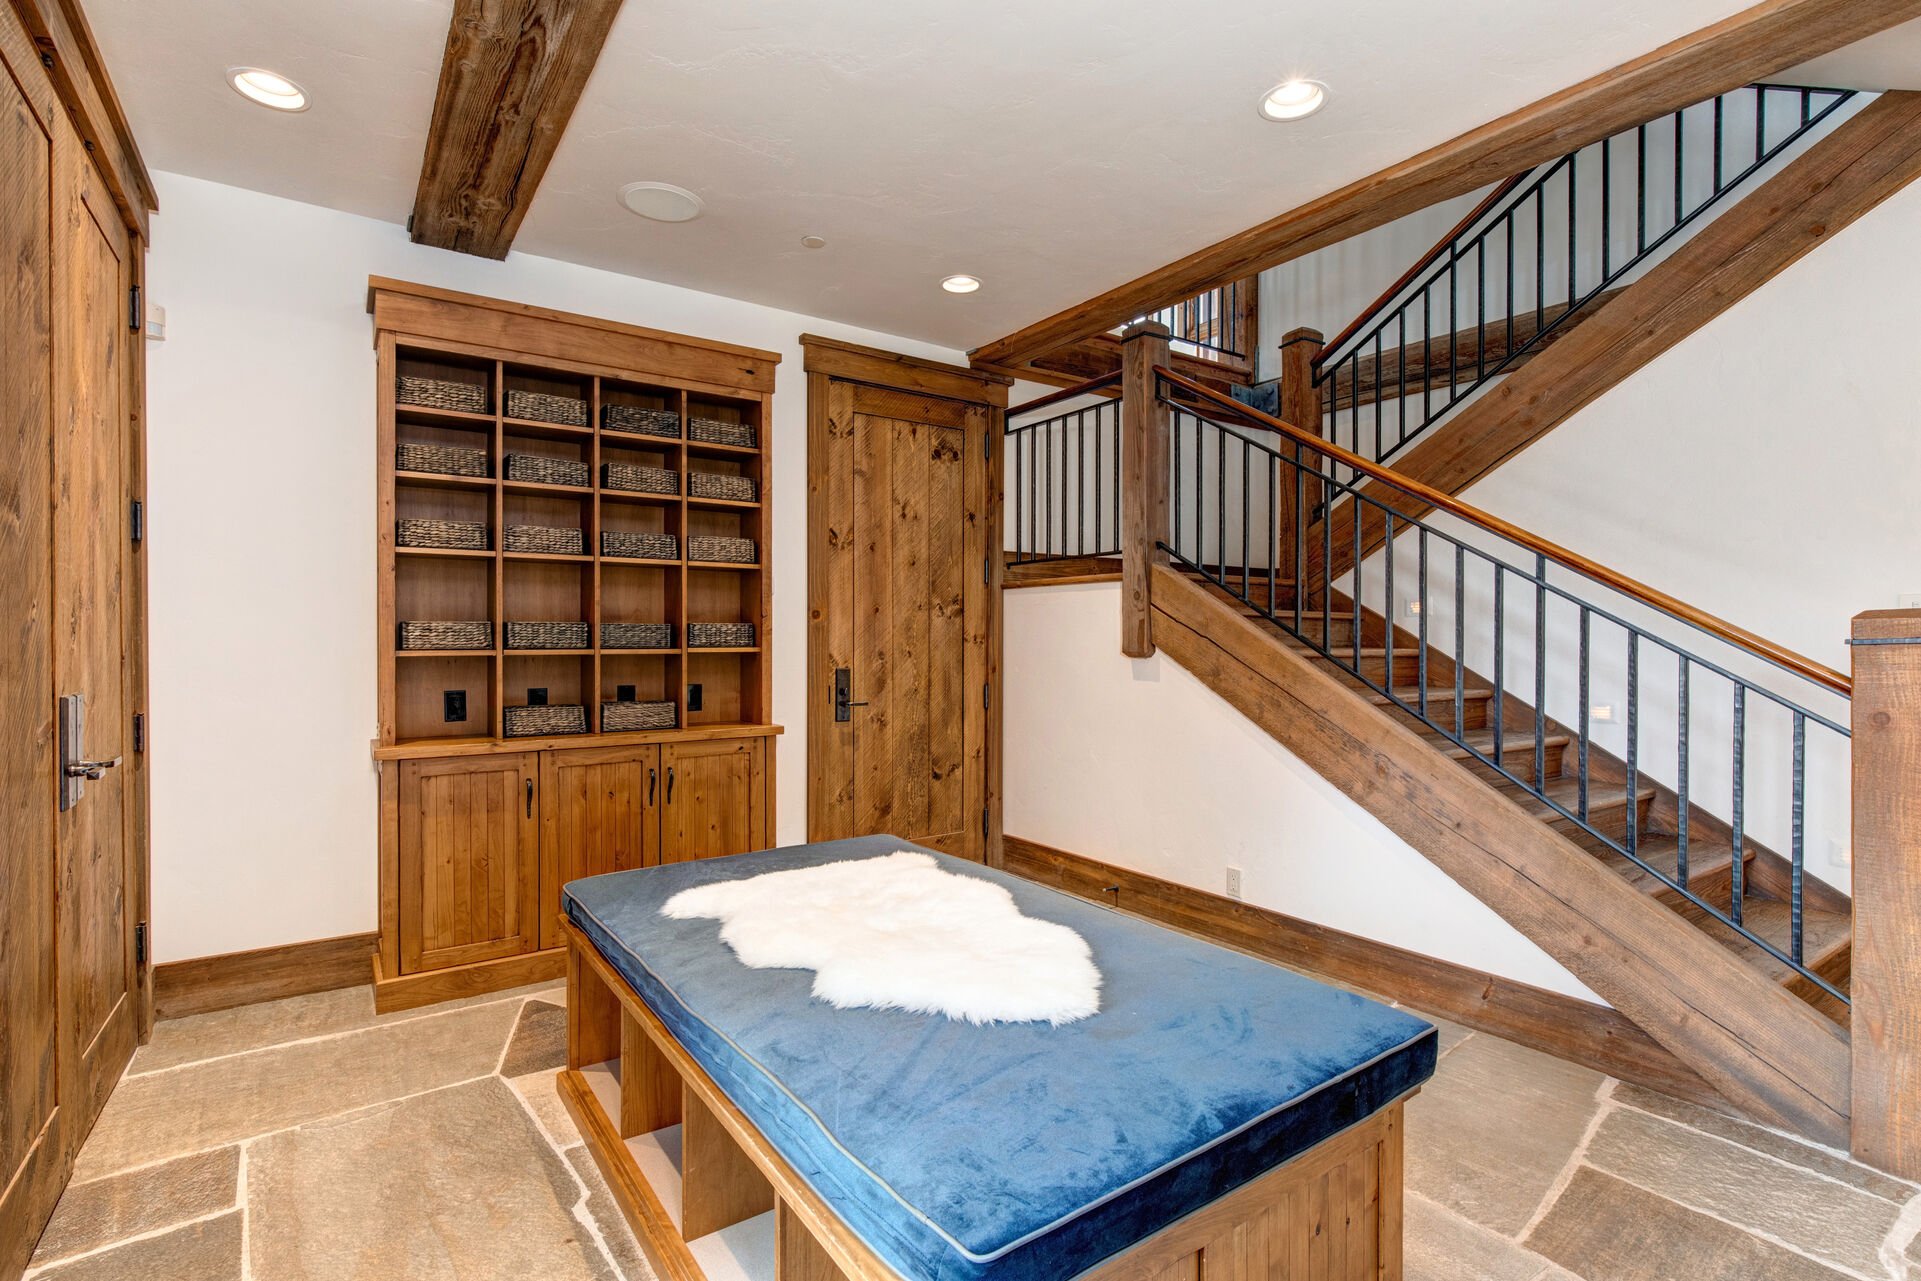 Ground level mudroom with bench and in closet storage